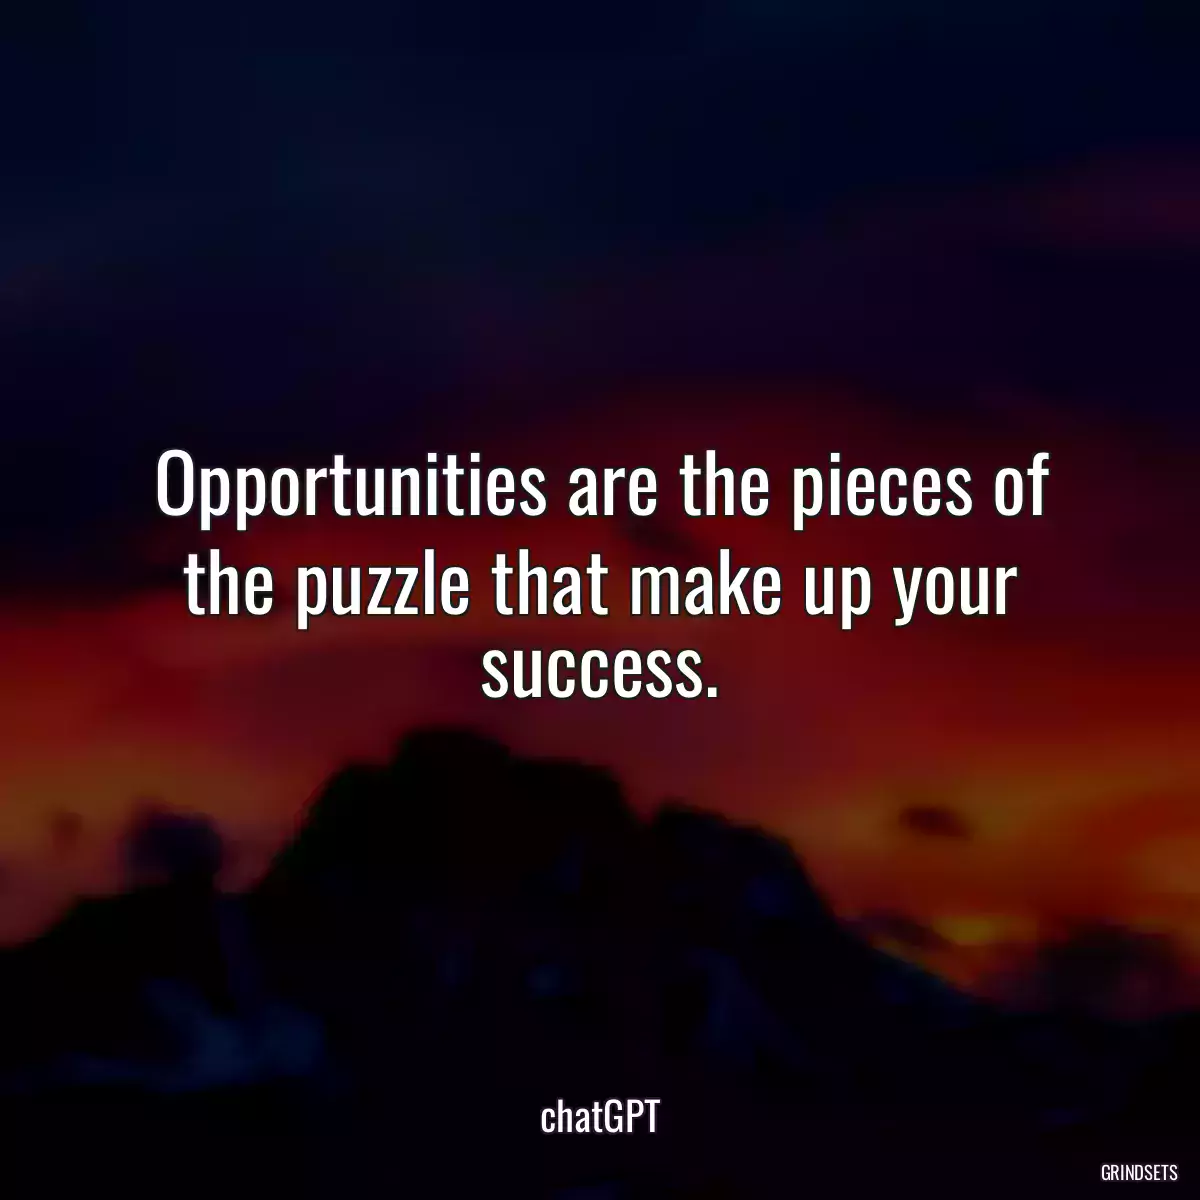 Opportunities are the pieces of the puzzle that make up your success.